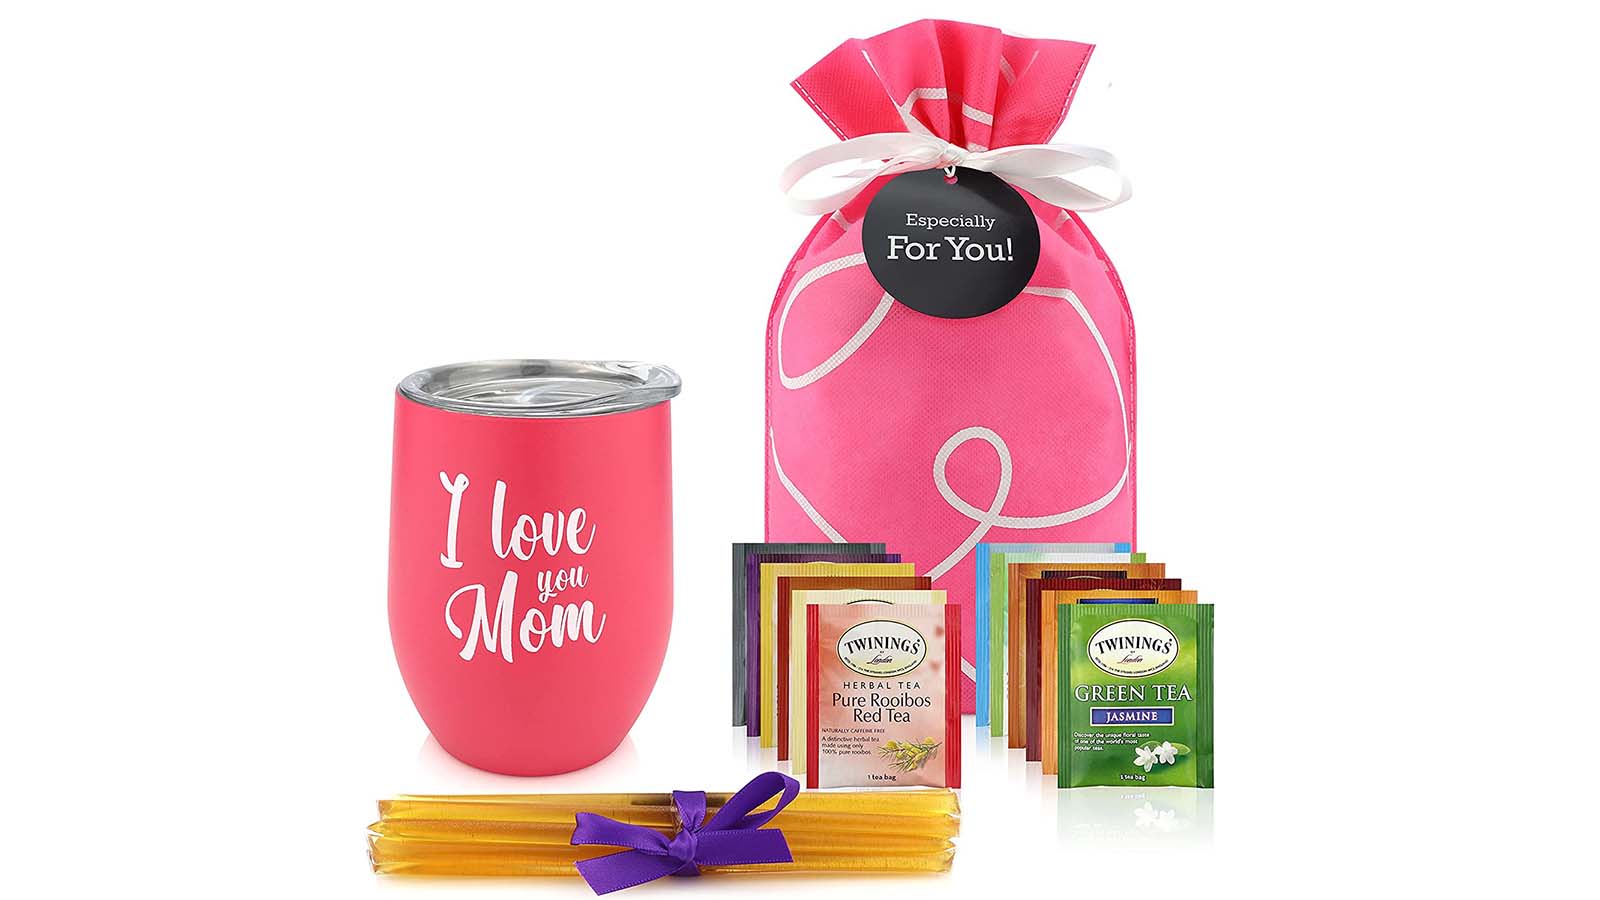 Mother's Day Gift, Gifts for Mom, Birthday Gift for Mom, Sweet Mom Gift,  Gift Box for Mom, Cute Mom Gift, Mom Gift From Daughter From Son 